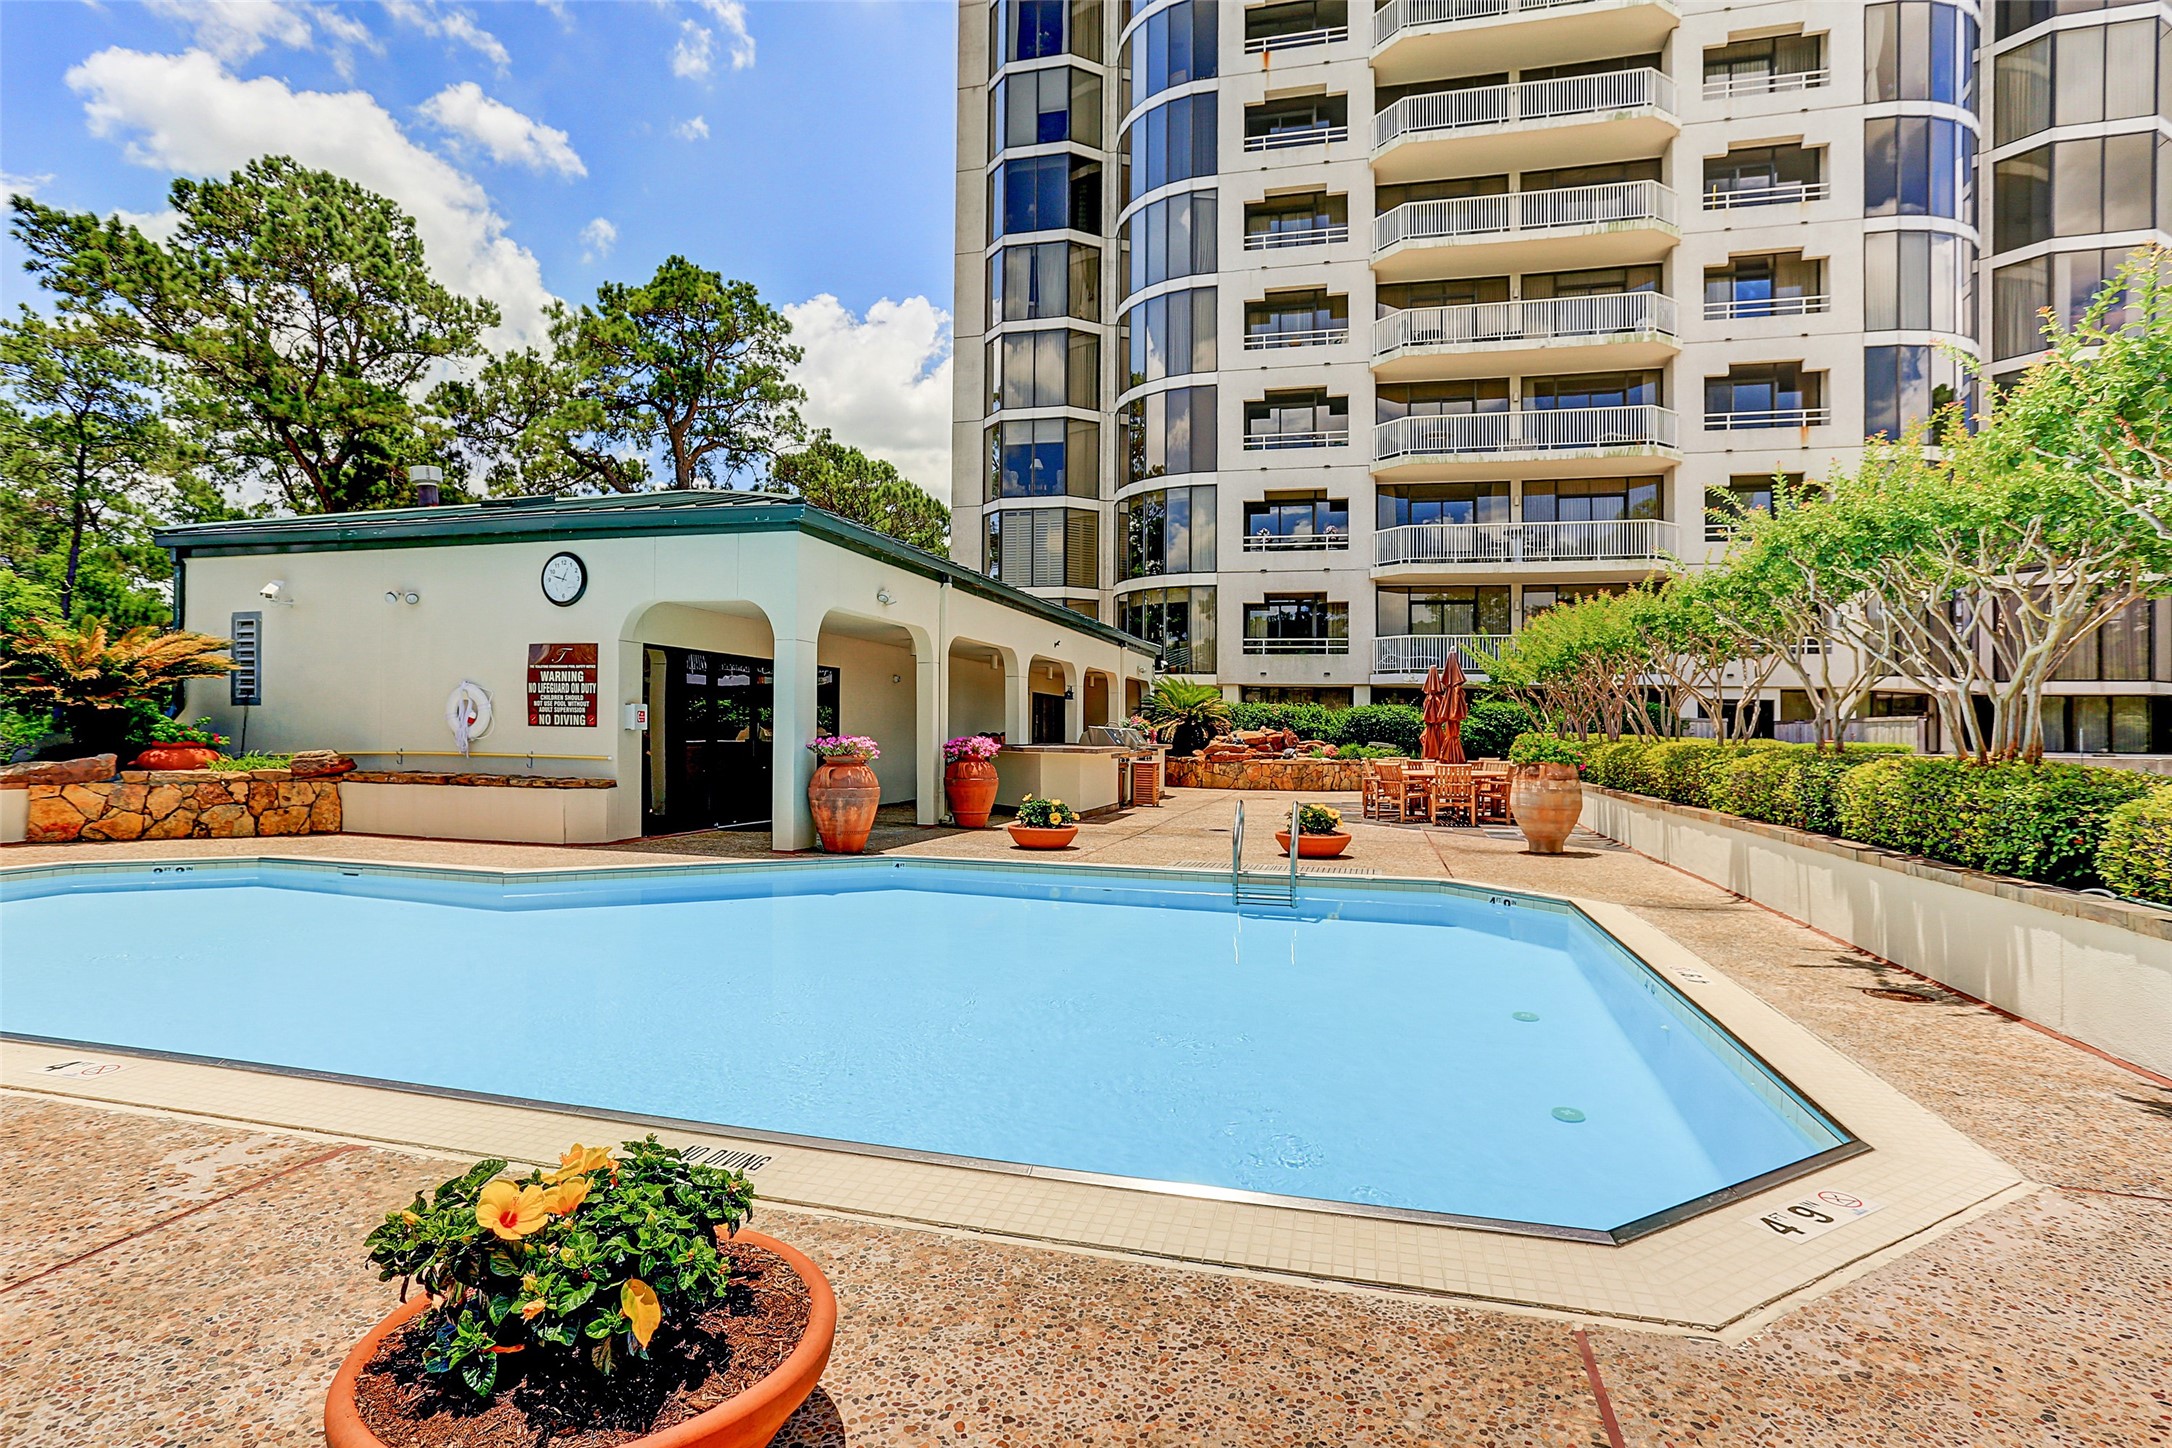 Tealstone Pool area with fire pit, table seating, club room, and exercise room.